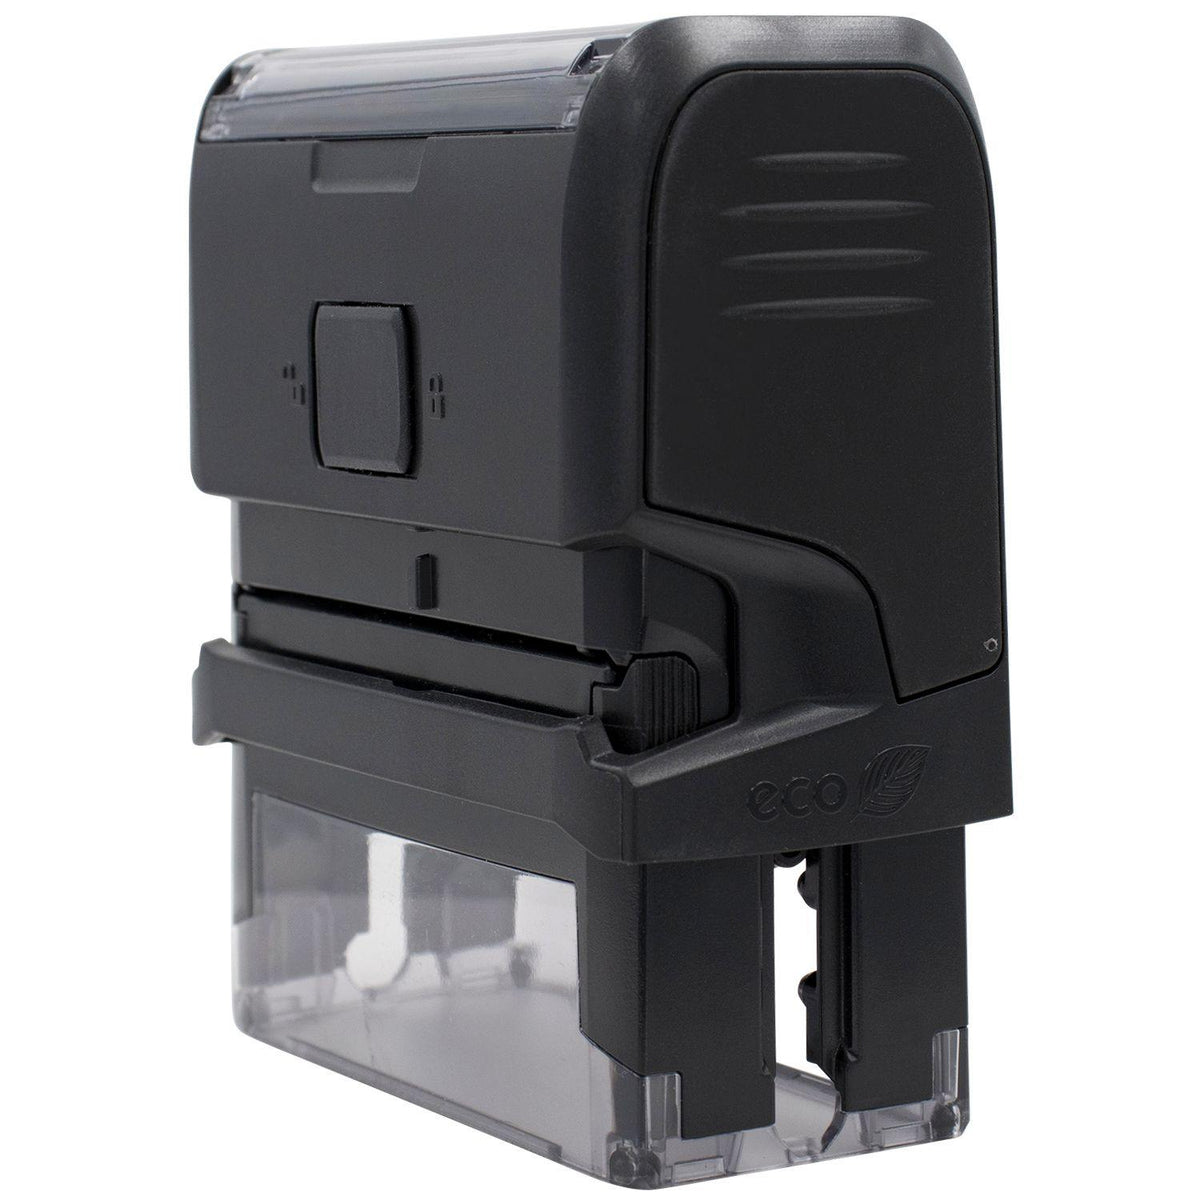 Self-Inking Bold Covid-19 Stamp - Engineer Seal Stamps - Brand_Trodat, Impression Size_Small, Stamp Type_Self-Inking Stamp, Type of Use_Medical Office